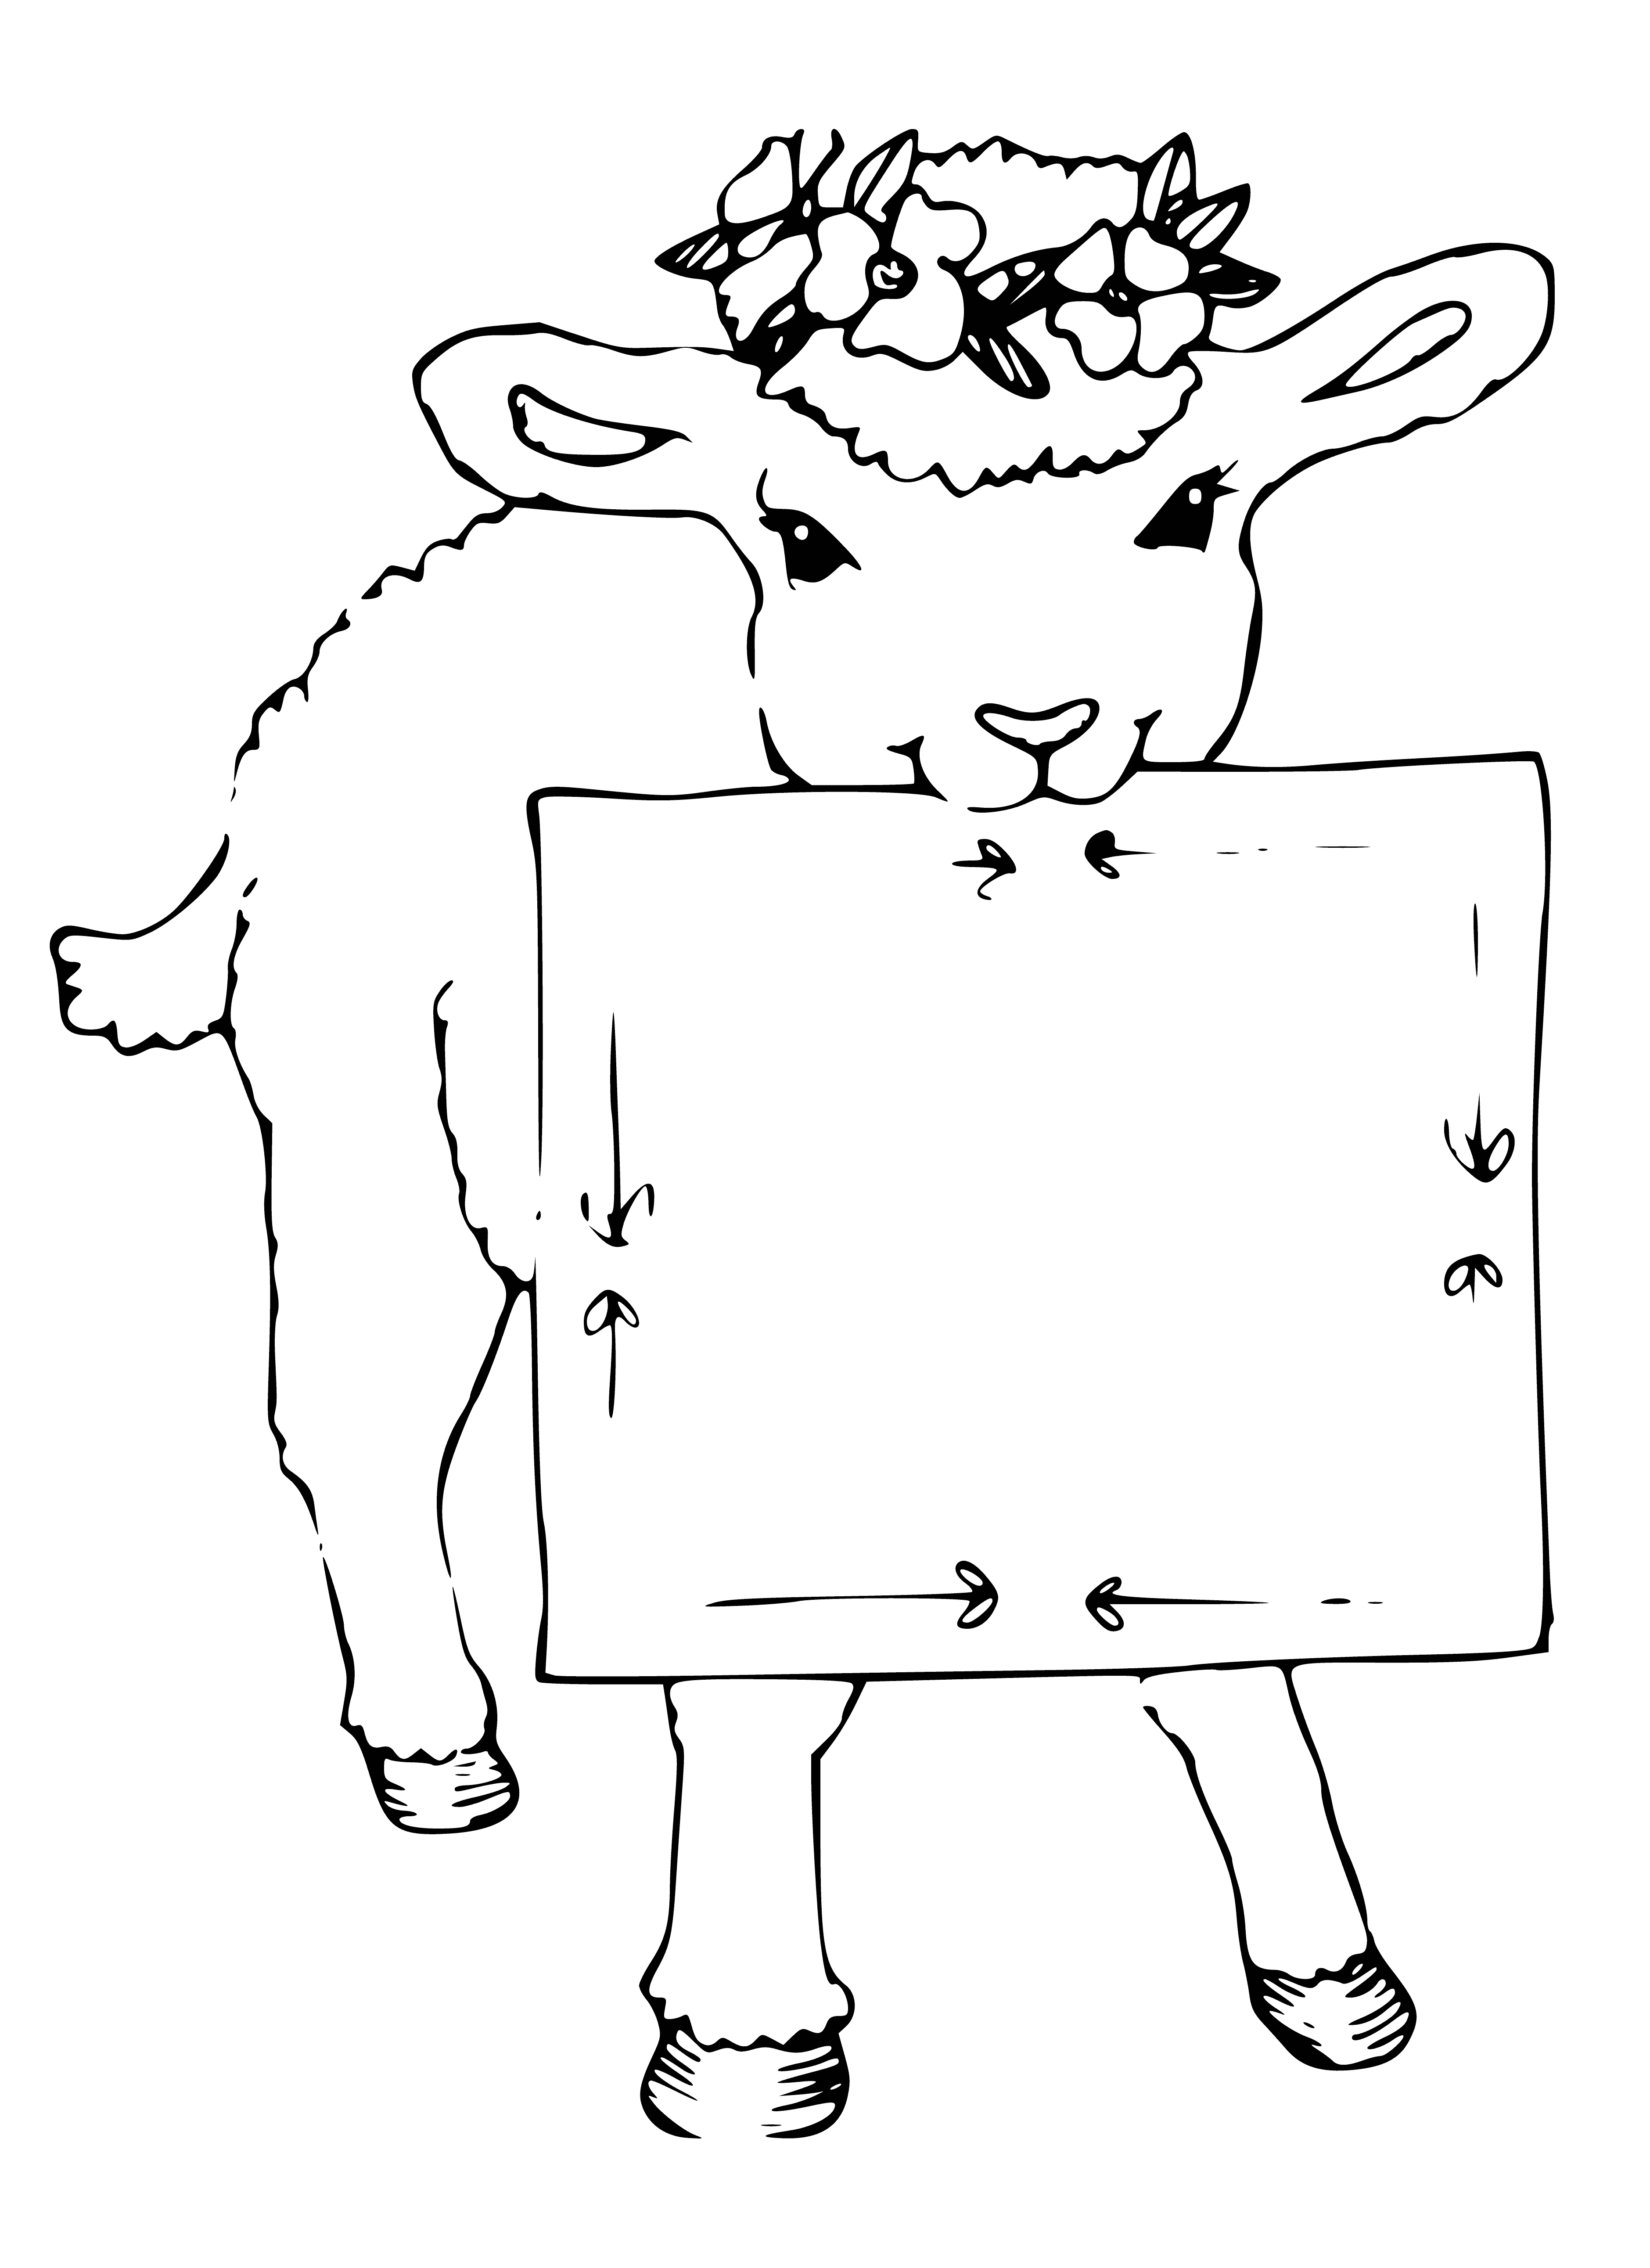 coloring page: Sheep with an open eyelid on head, white wool, black patch and nose, two horns.